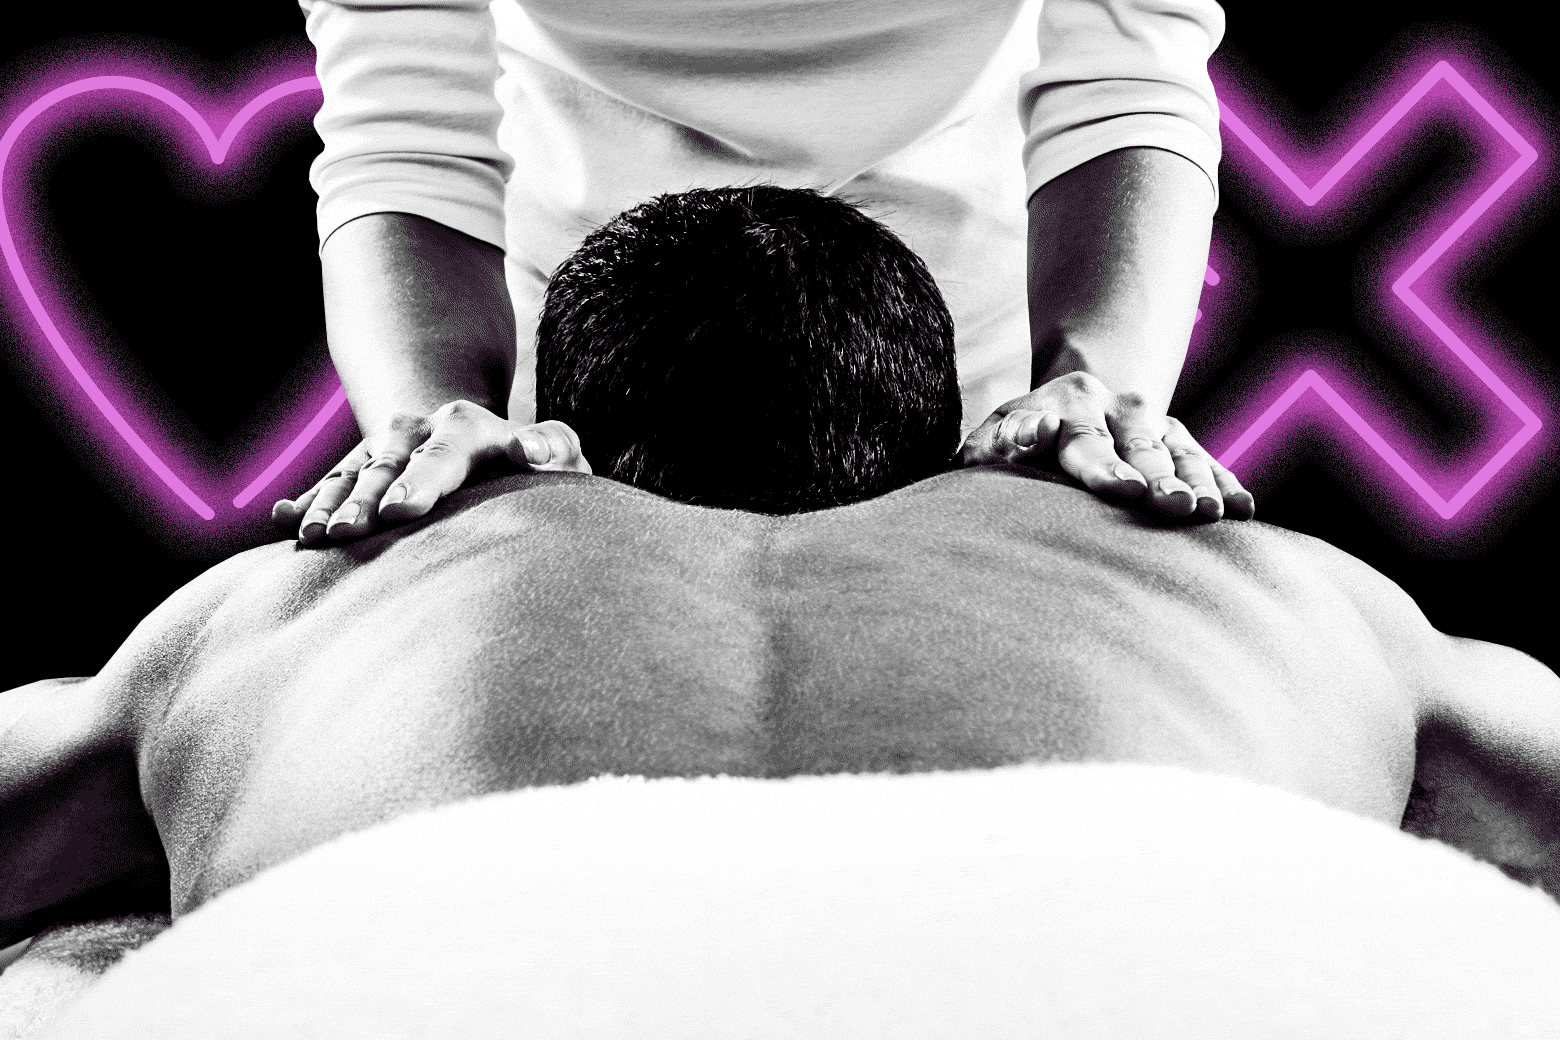 Photo illustration of a man getting a massage surrounded by neon X's and hearts.